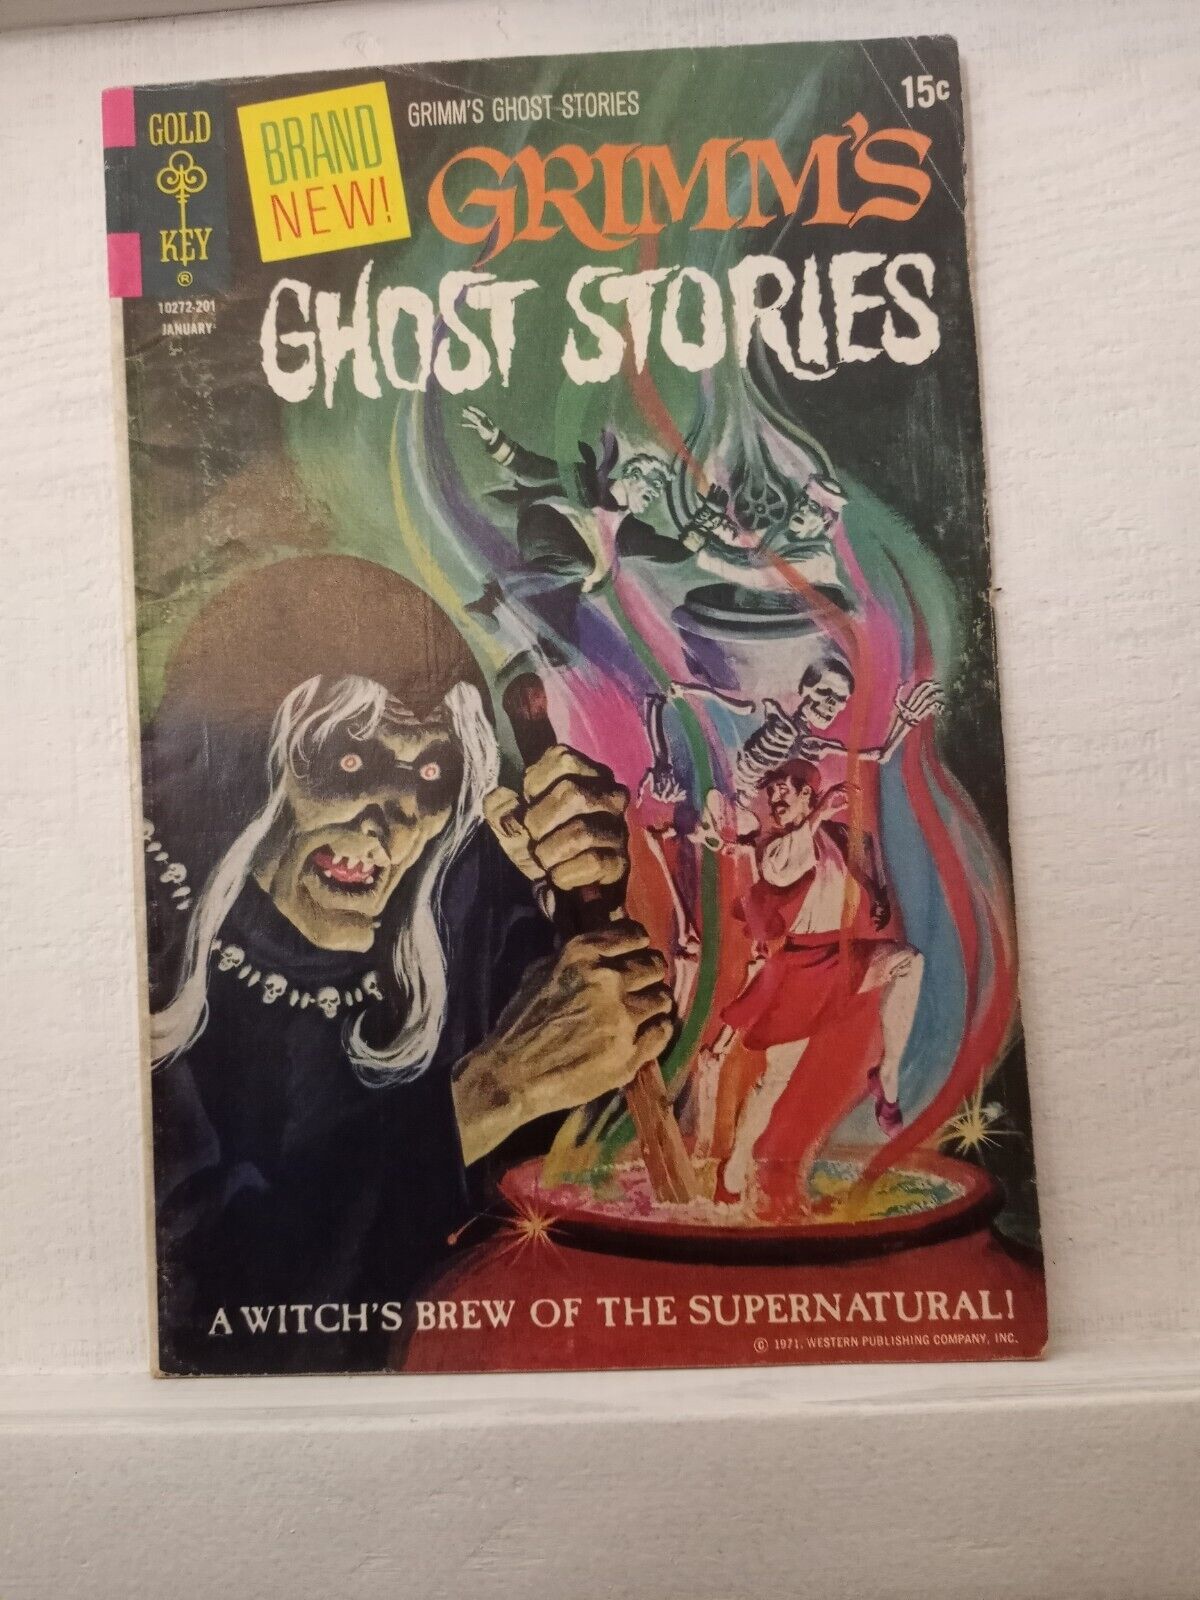 RARE 1972 Grimm\'s Ghost Stories #1 (Gold Key) Nice pre-owned mid-grade copy